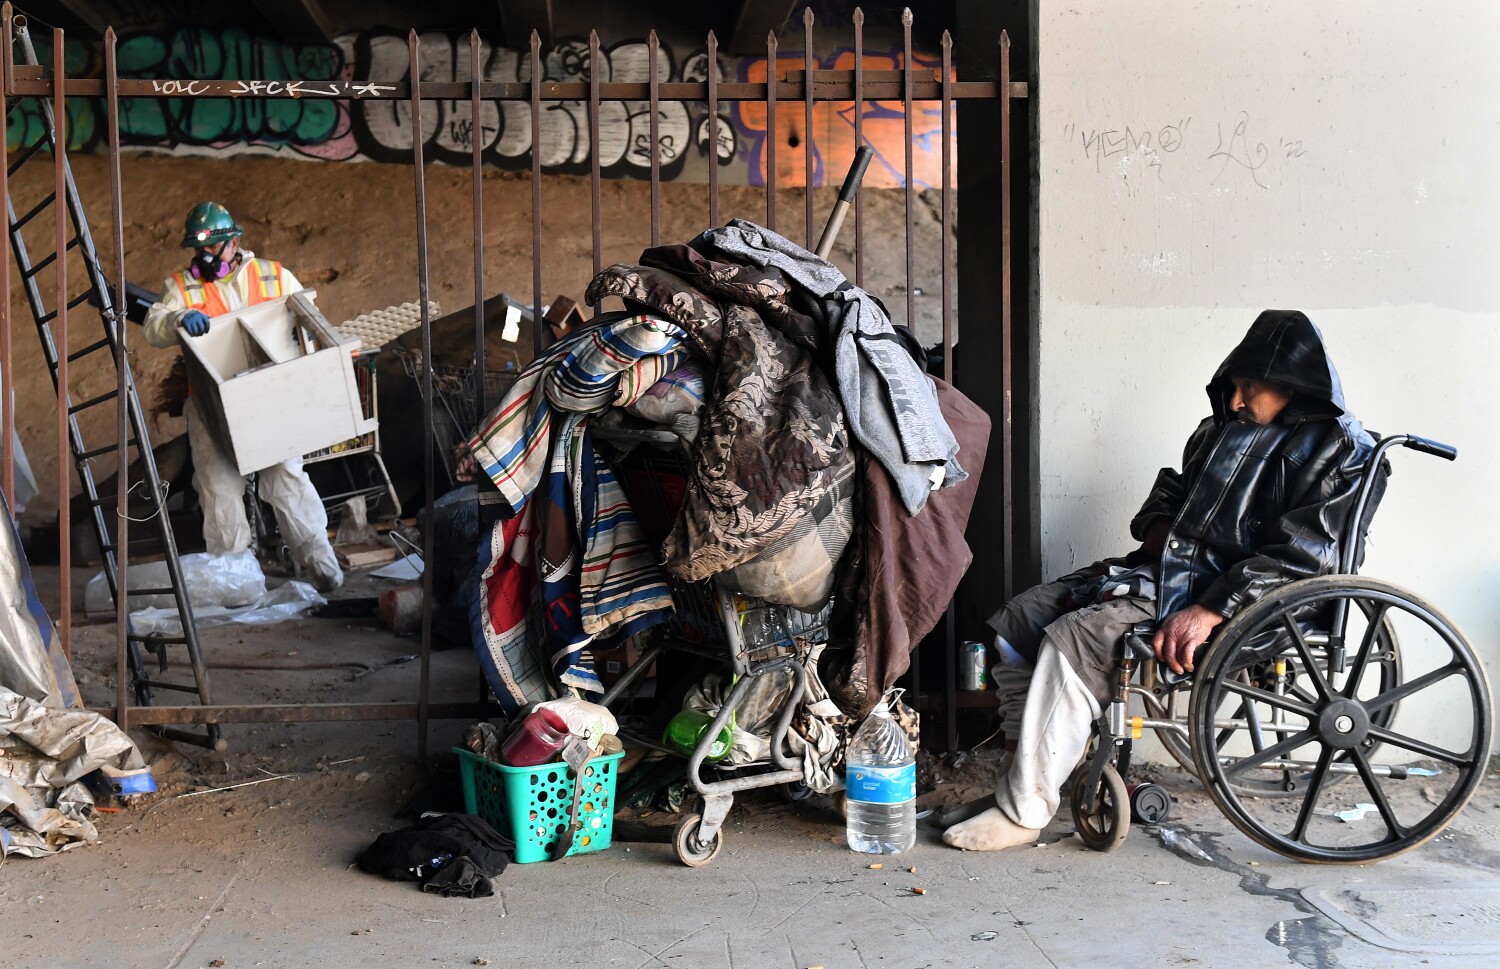 L.A.'s $1.2-billion bond measure may not be enough to tackle homelessness, audit finds